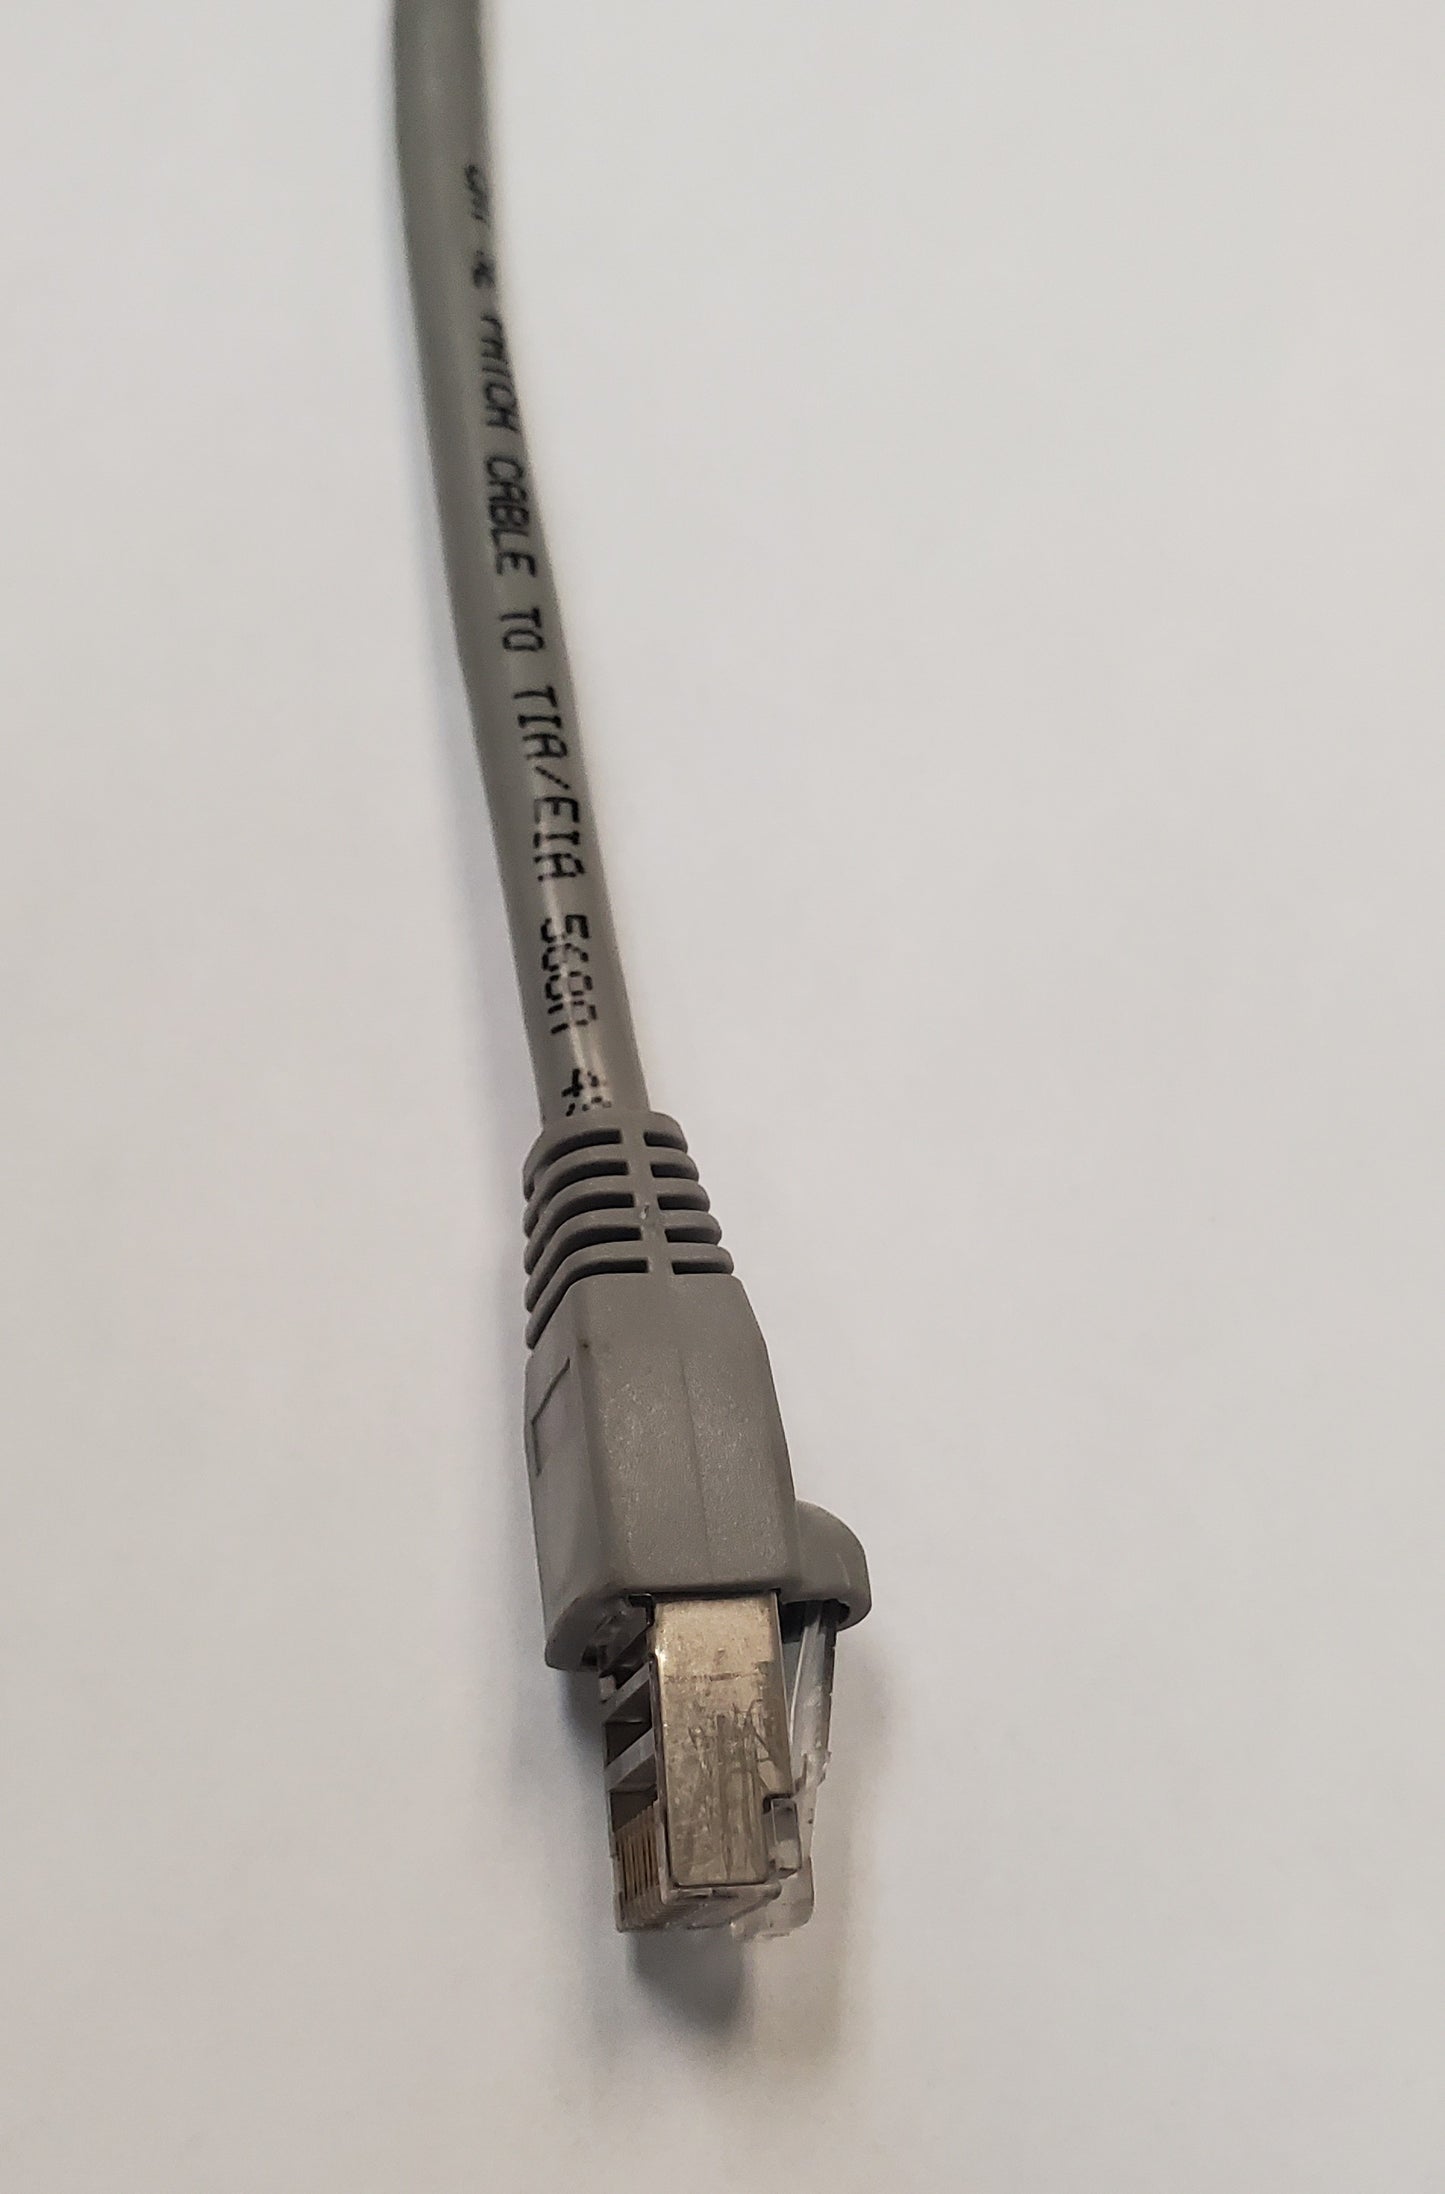 CSYNC-RJ45-Y Serial Control Cable for ConnectPRO KVM Switches